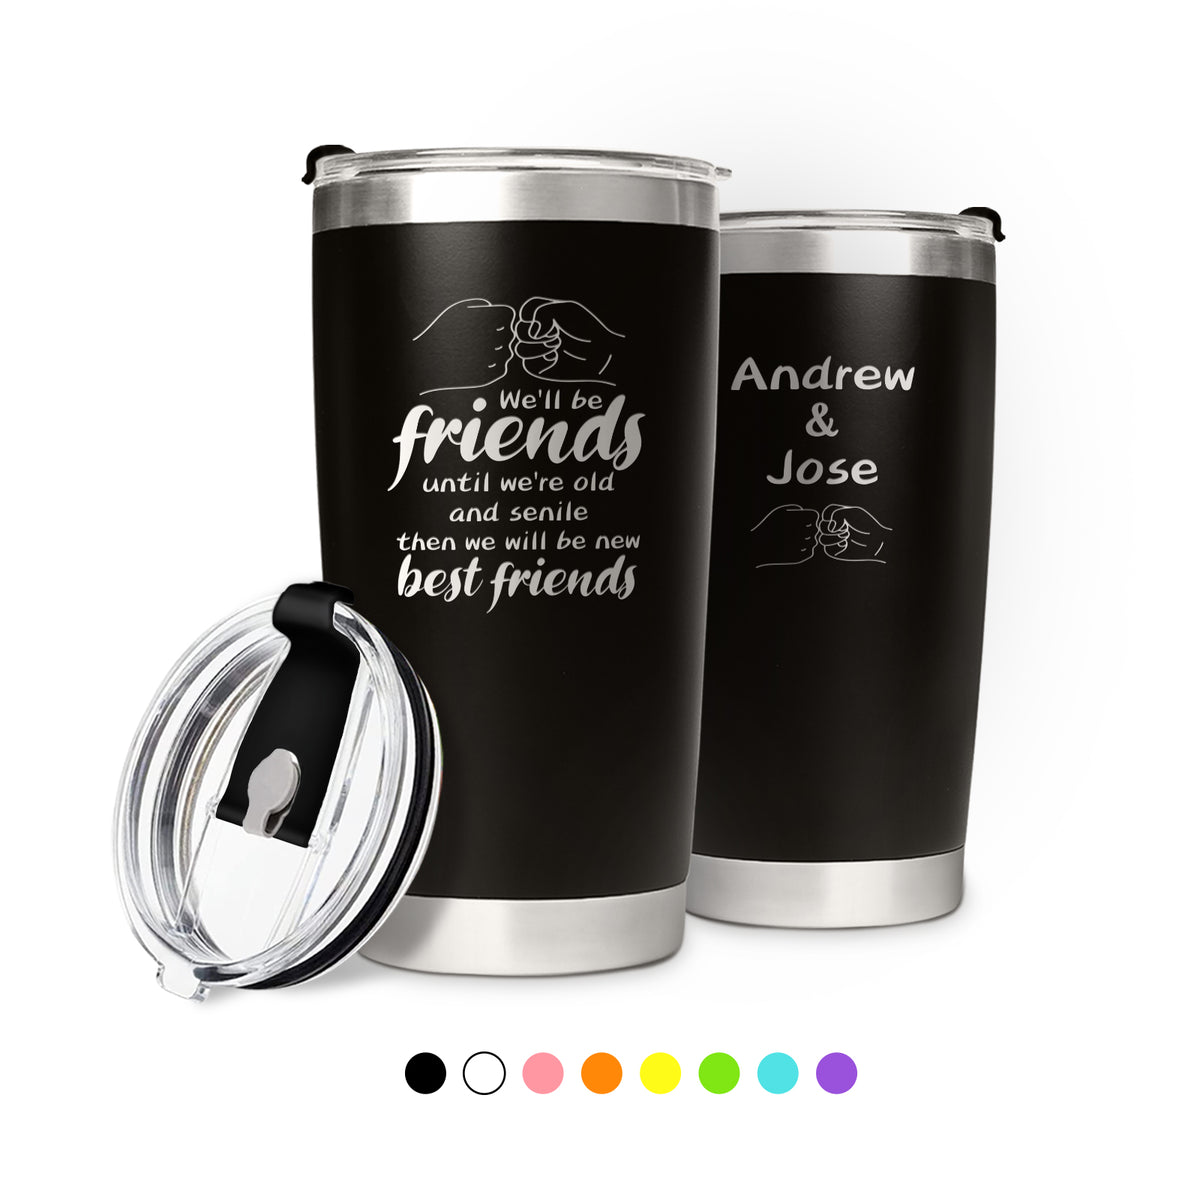 Best Friends Personalized Tumbler with Engraved Name Personalized Gifts for Friends